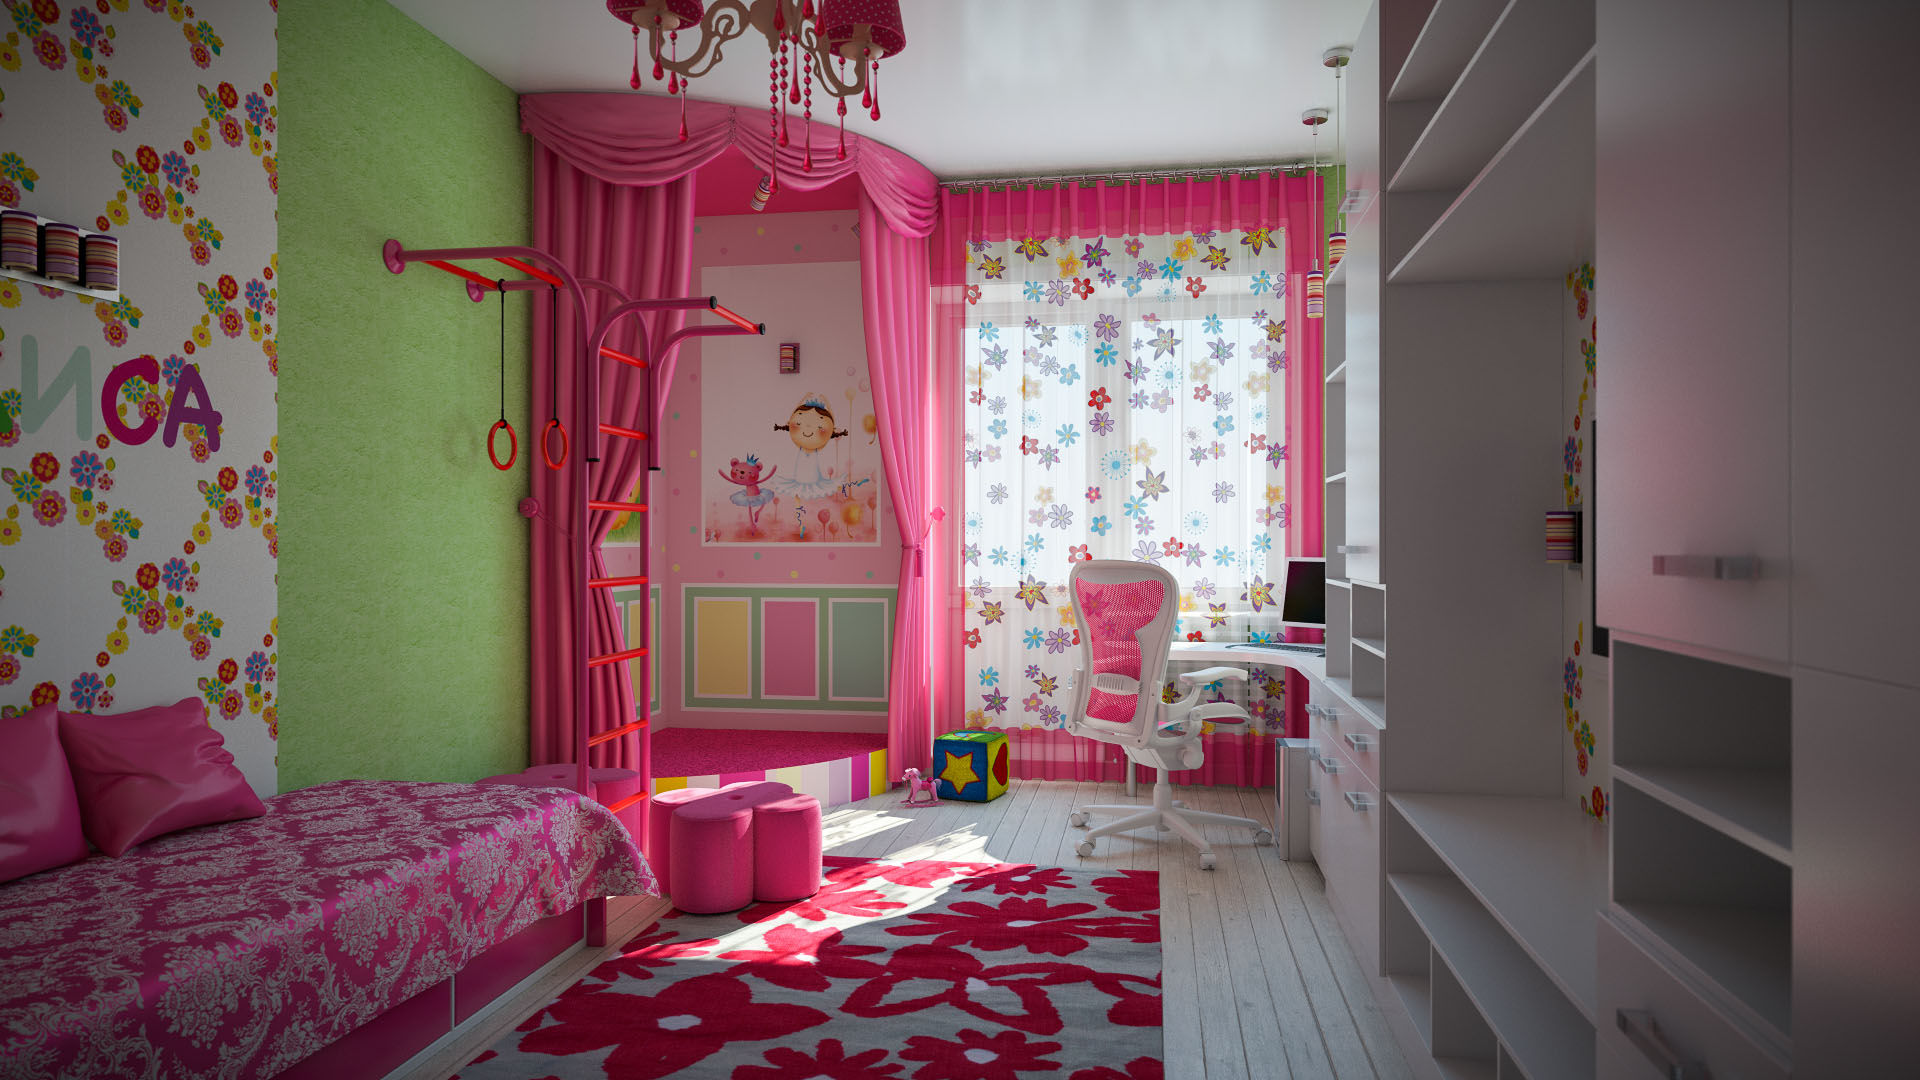 Wallpaper design for a children's room for girls with bright red accents